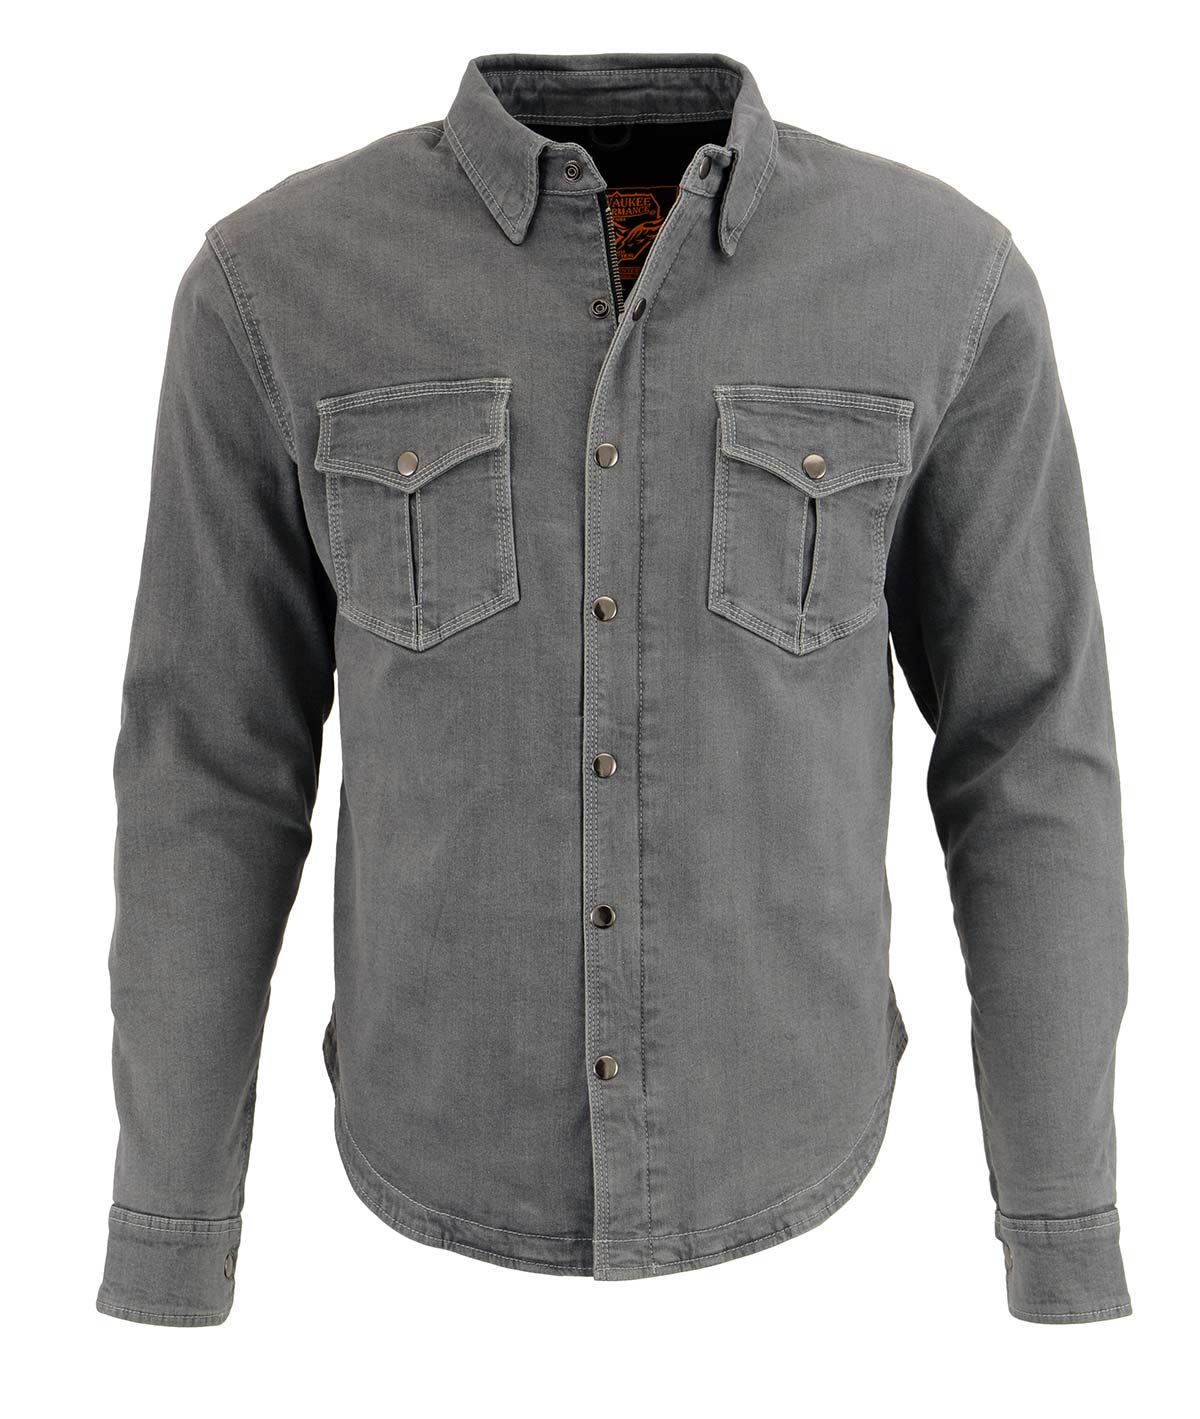 Men's Grey Flannel Biker Shirt with CE Approved Armor - Reinforced